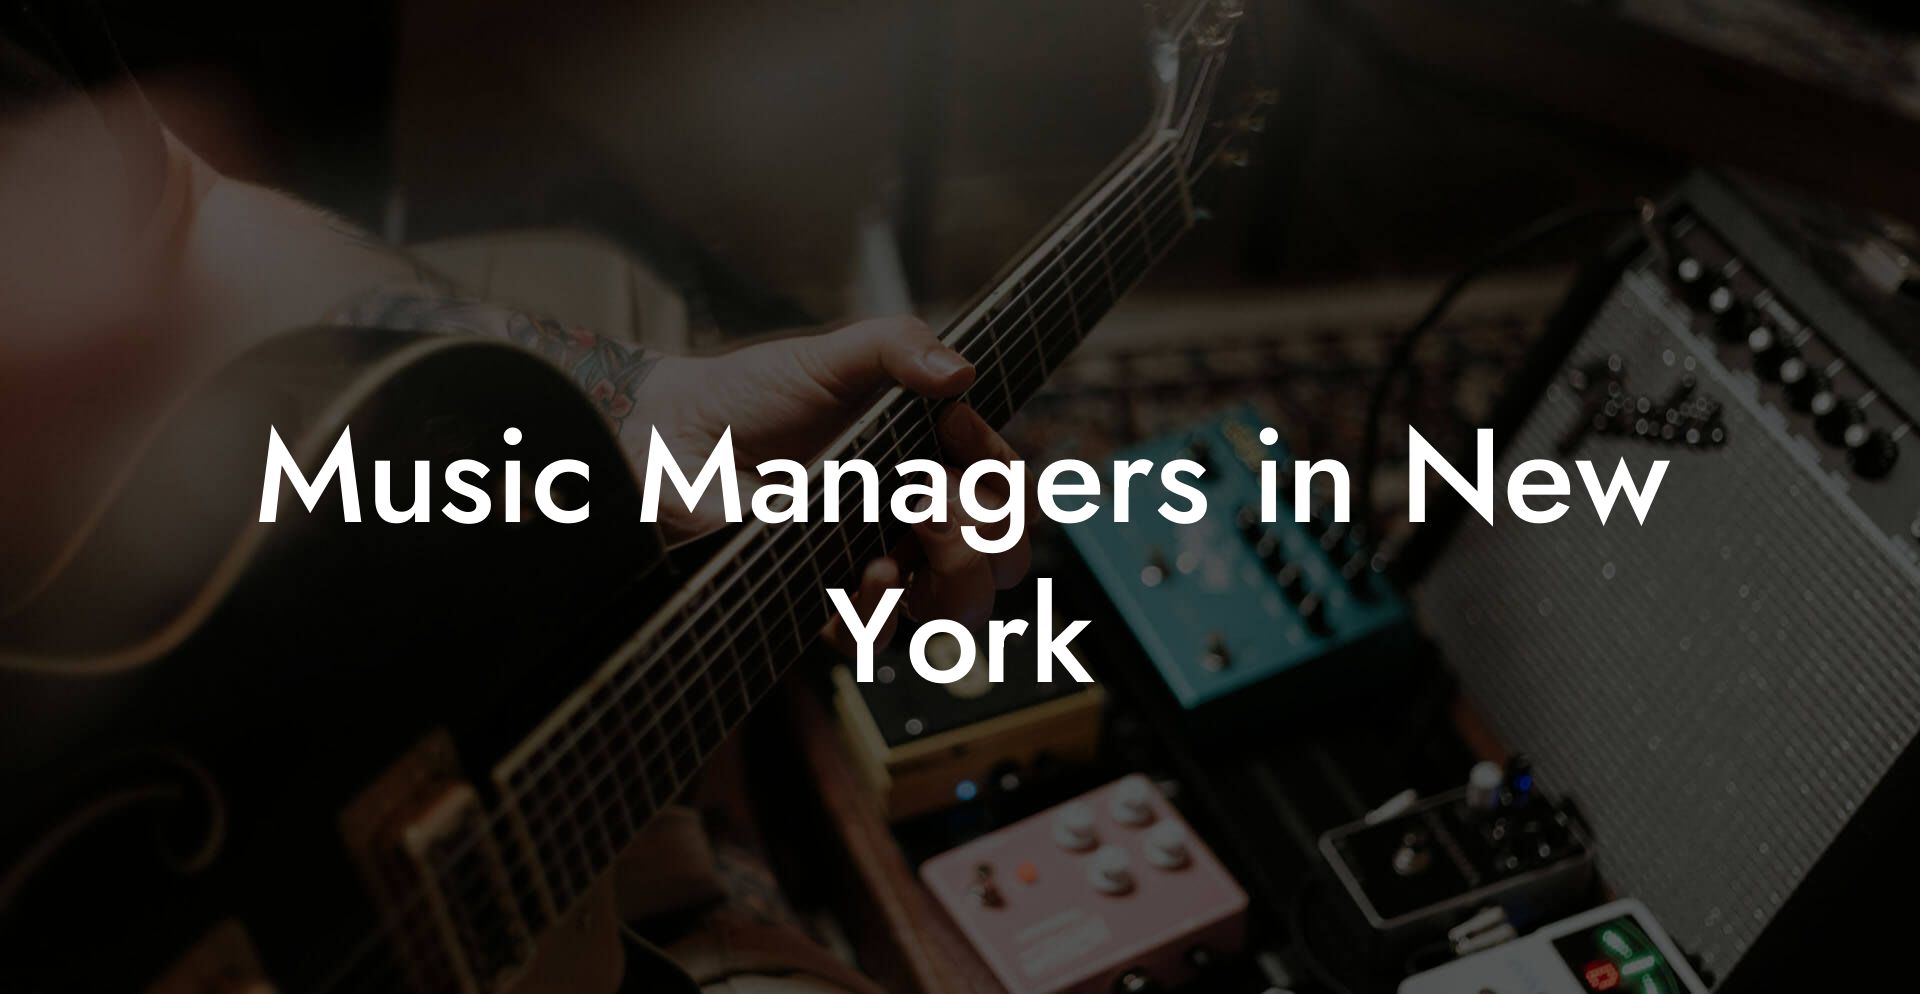 Music Managers in New York